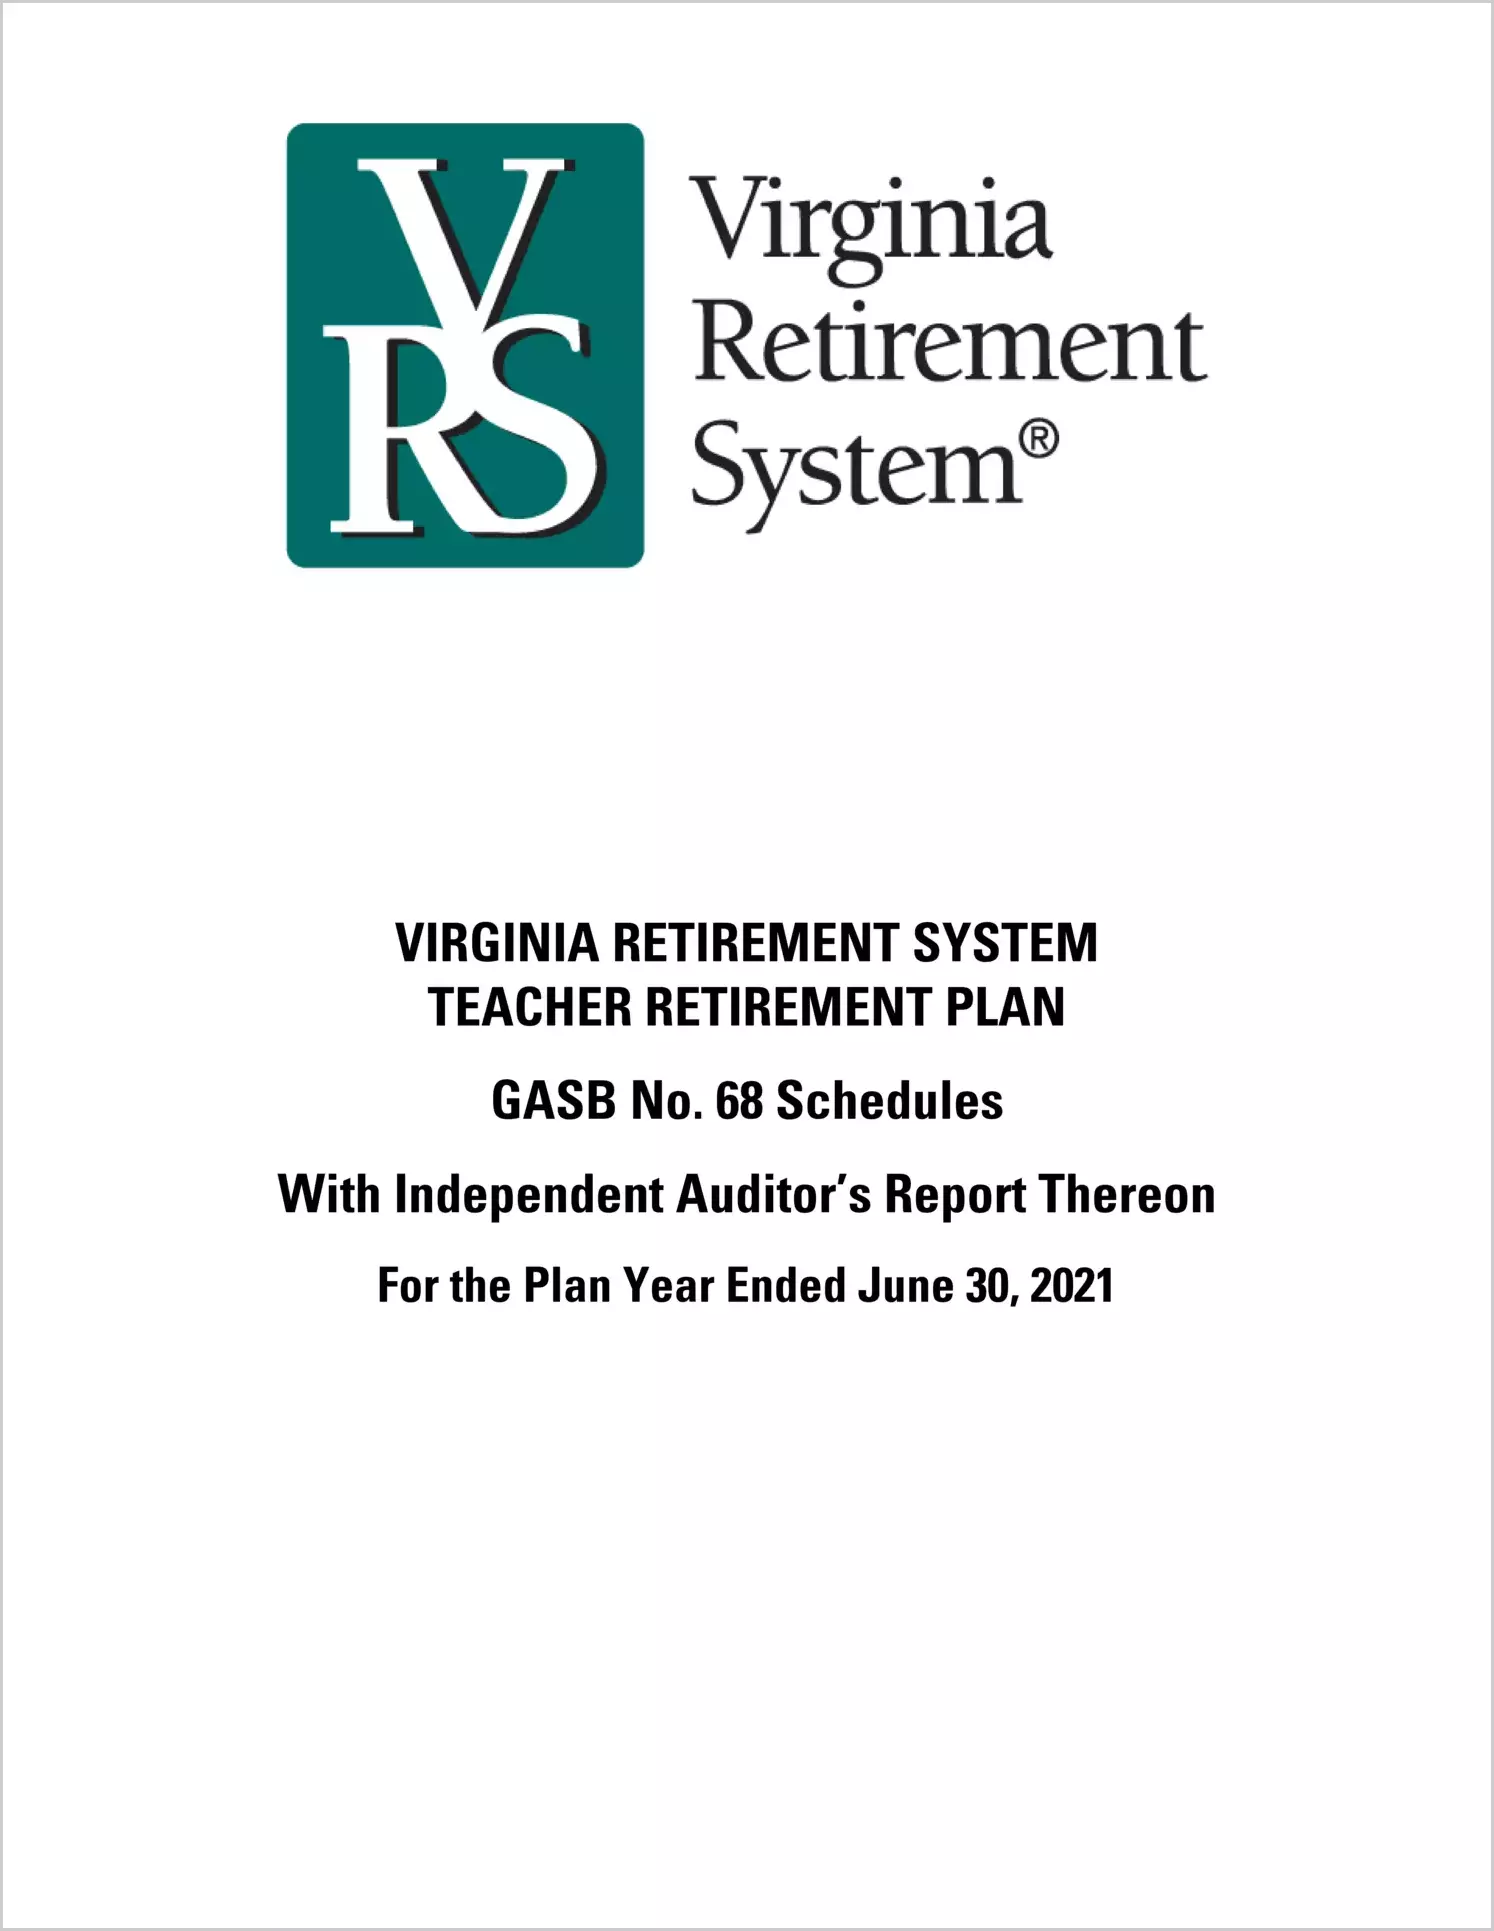 GASB 68 Schedule - Virginia Retirement System Teacher Retirement Plan for the year ended June 30, 2021